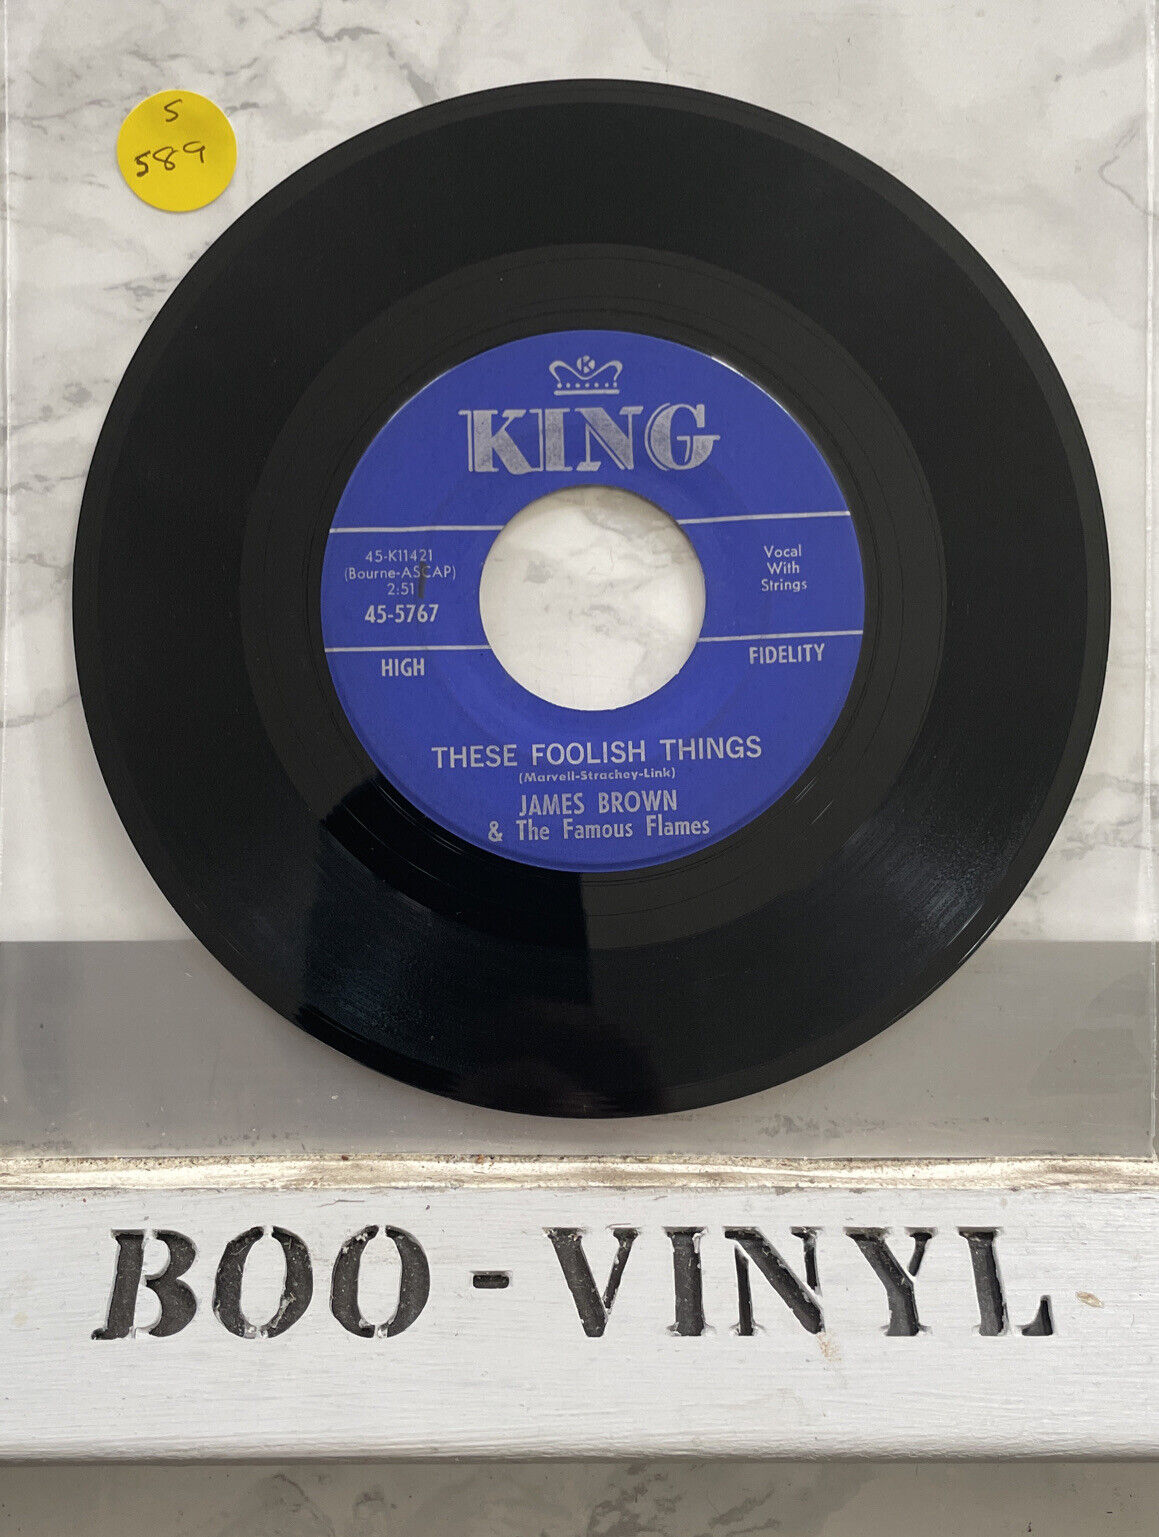 James Brown & The Famous Flames - These Foolish Things 7” RnB / Funk Vinyl EX